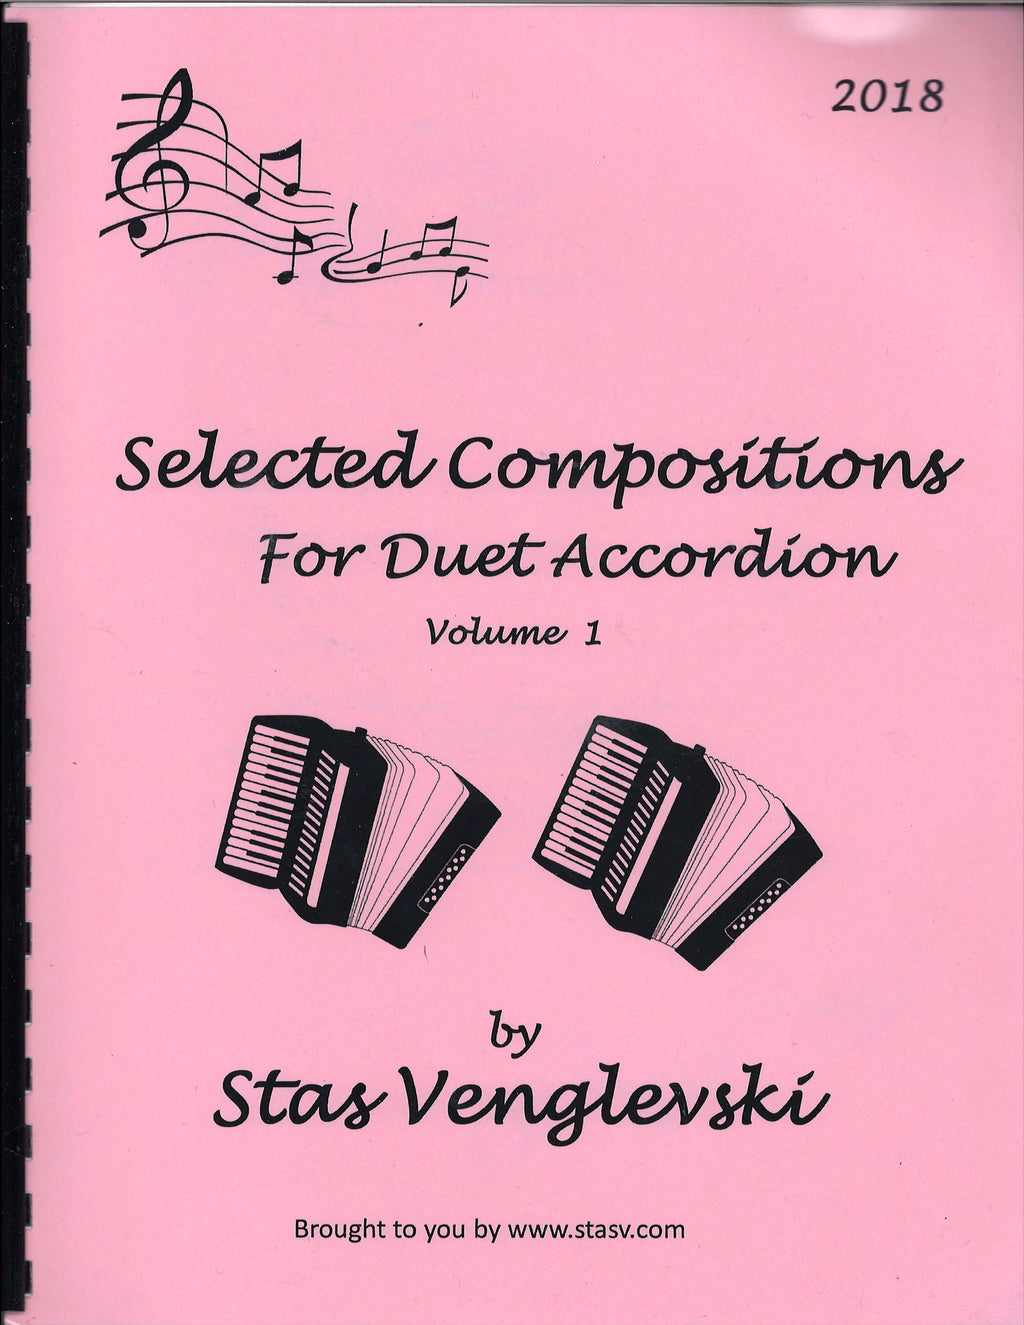 Selected Compositions for Duet Accordion Volume 1